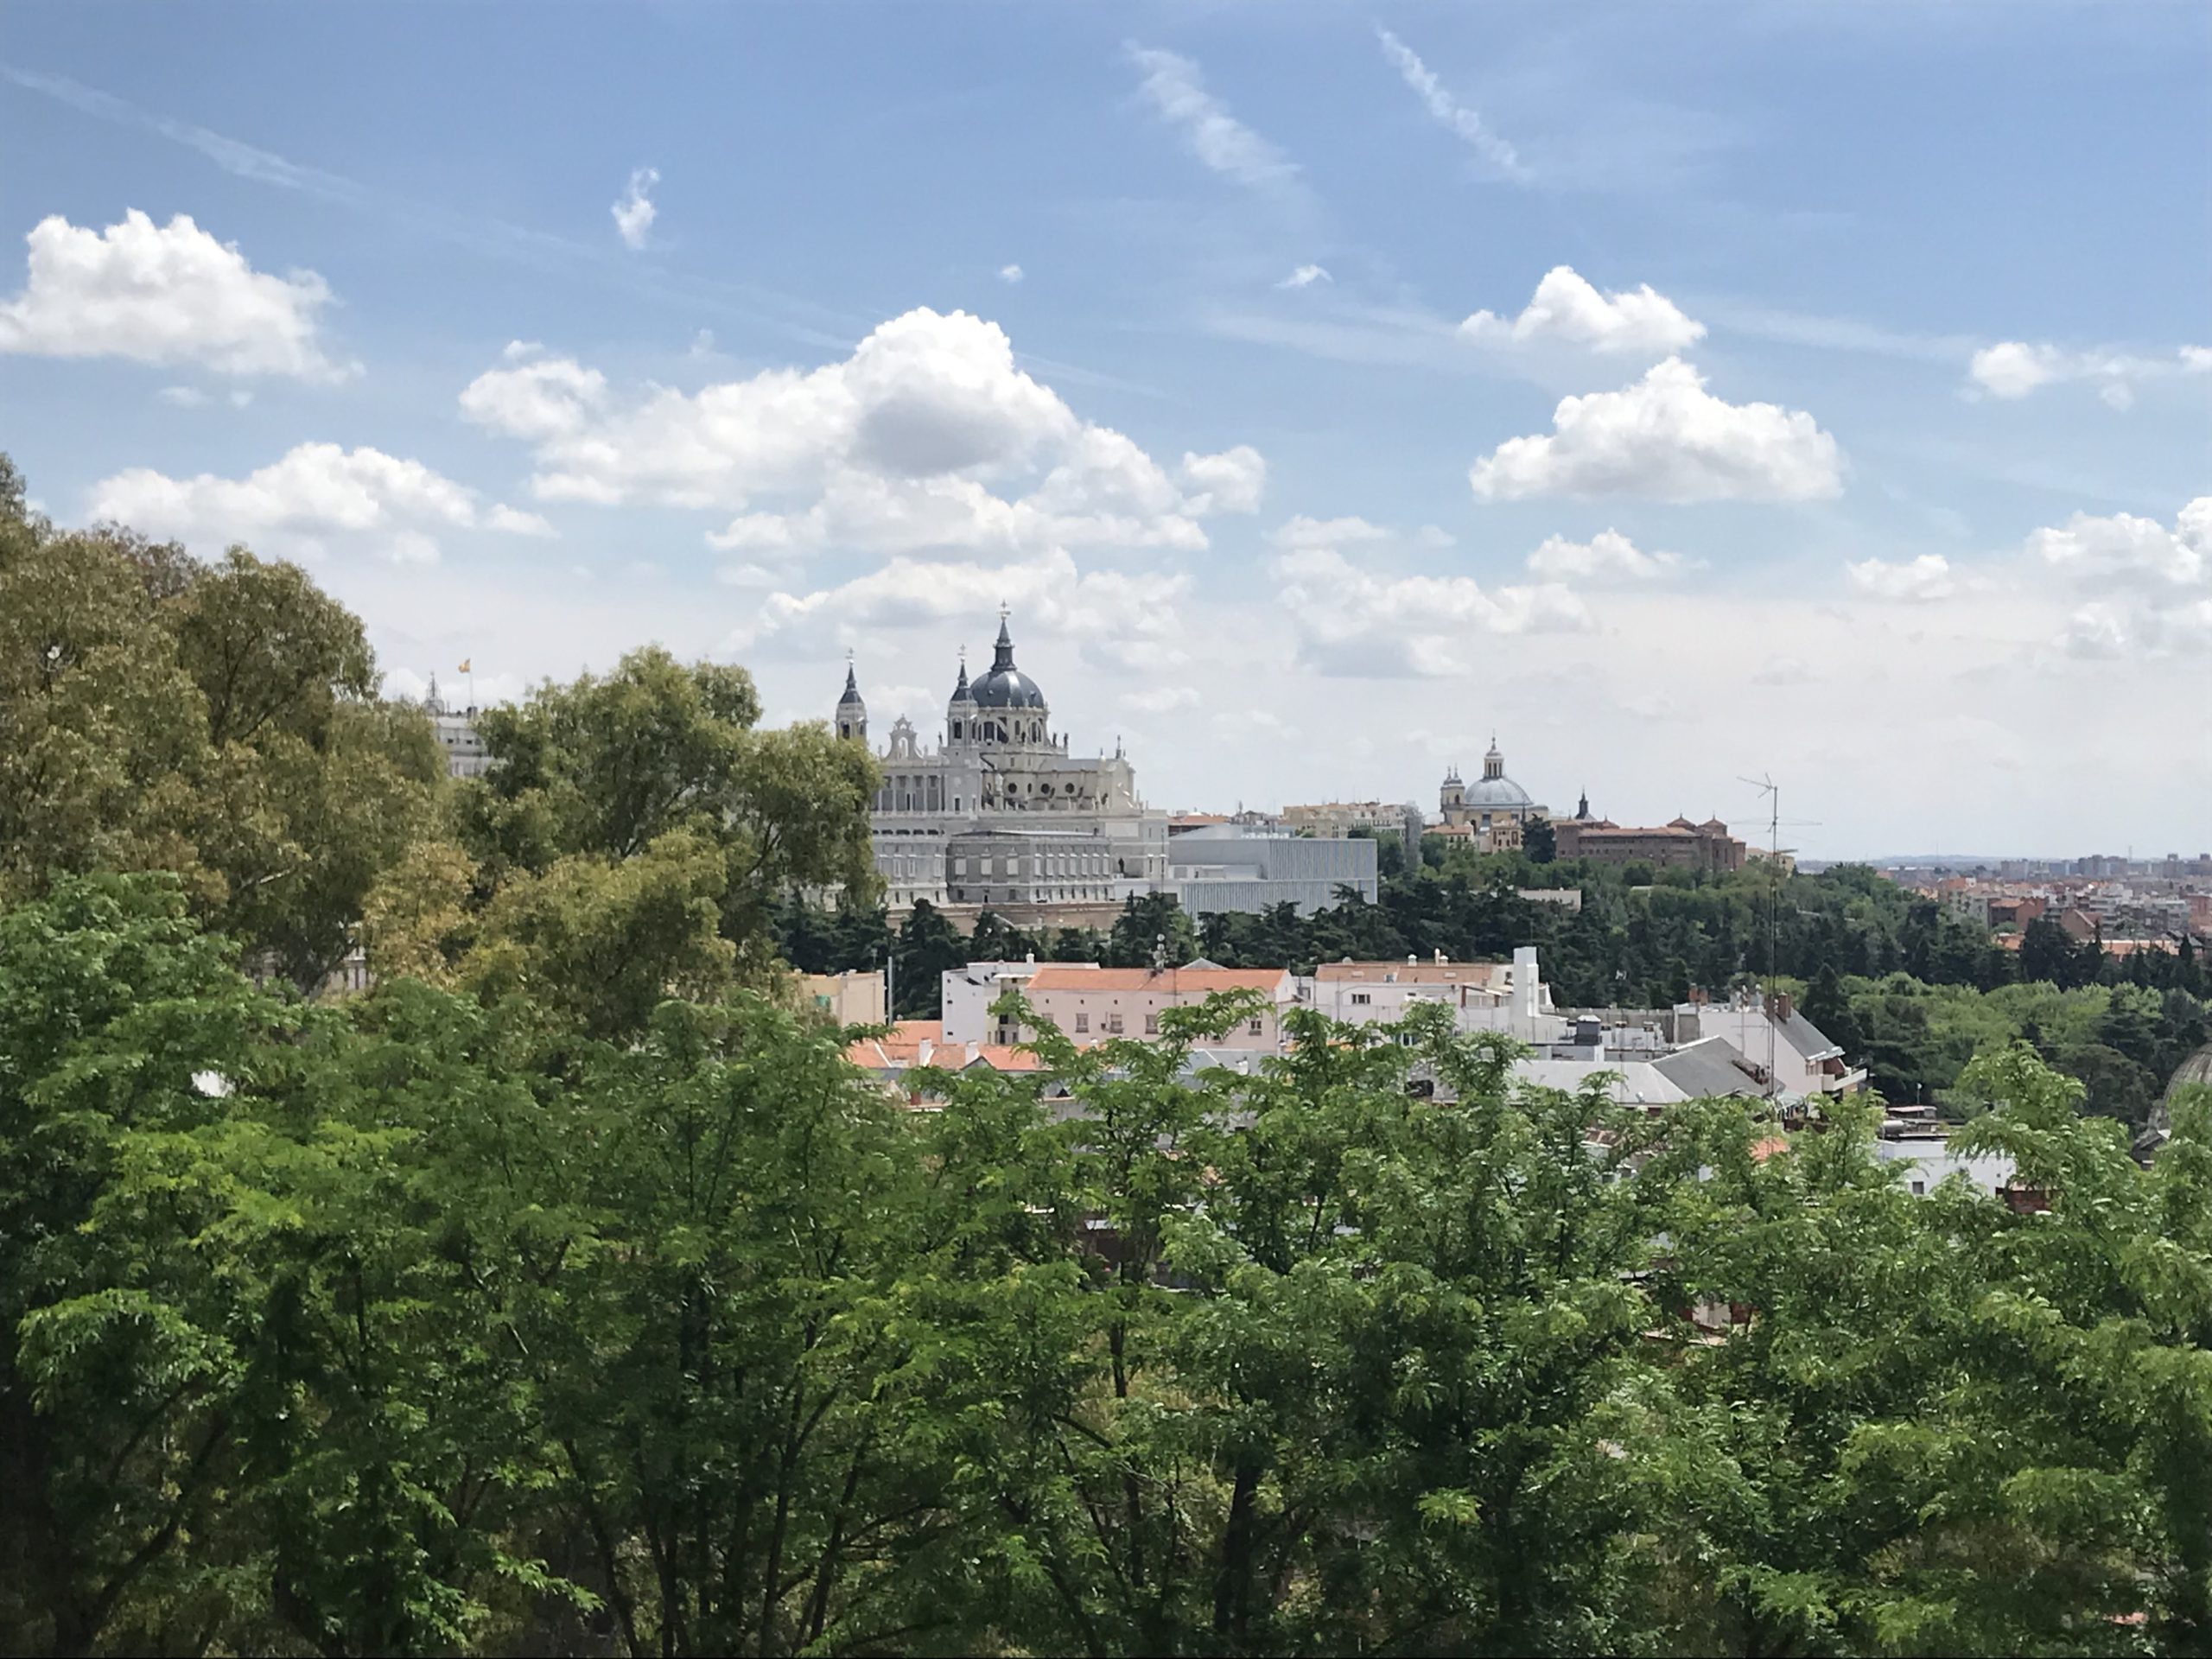 The view of the Almudena Cathedral from the Temple of Debod